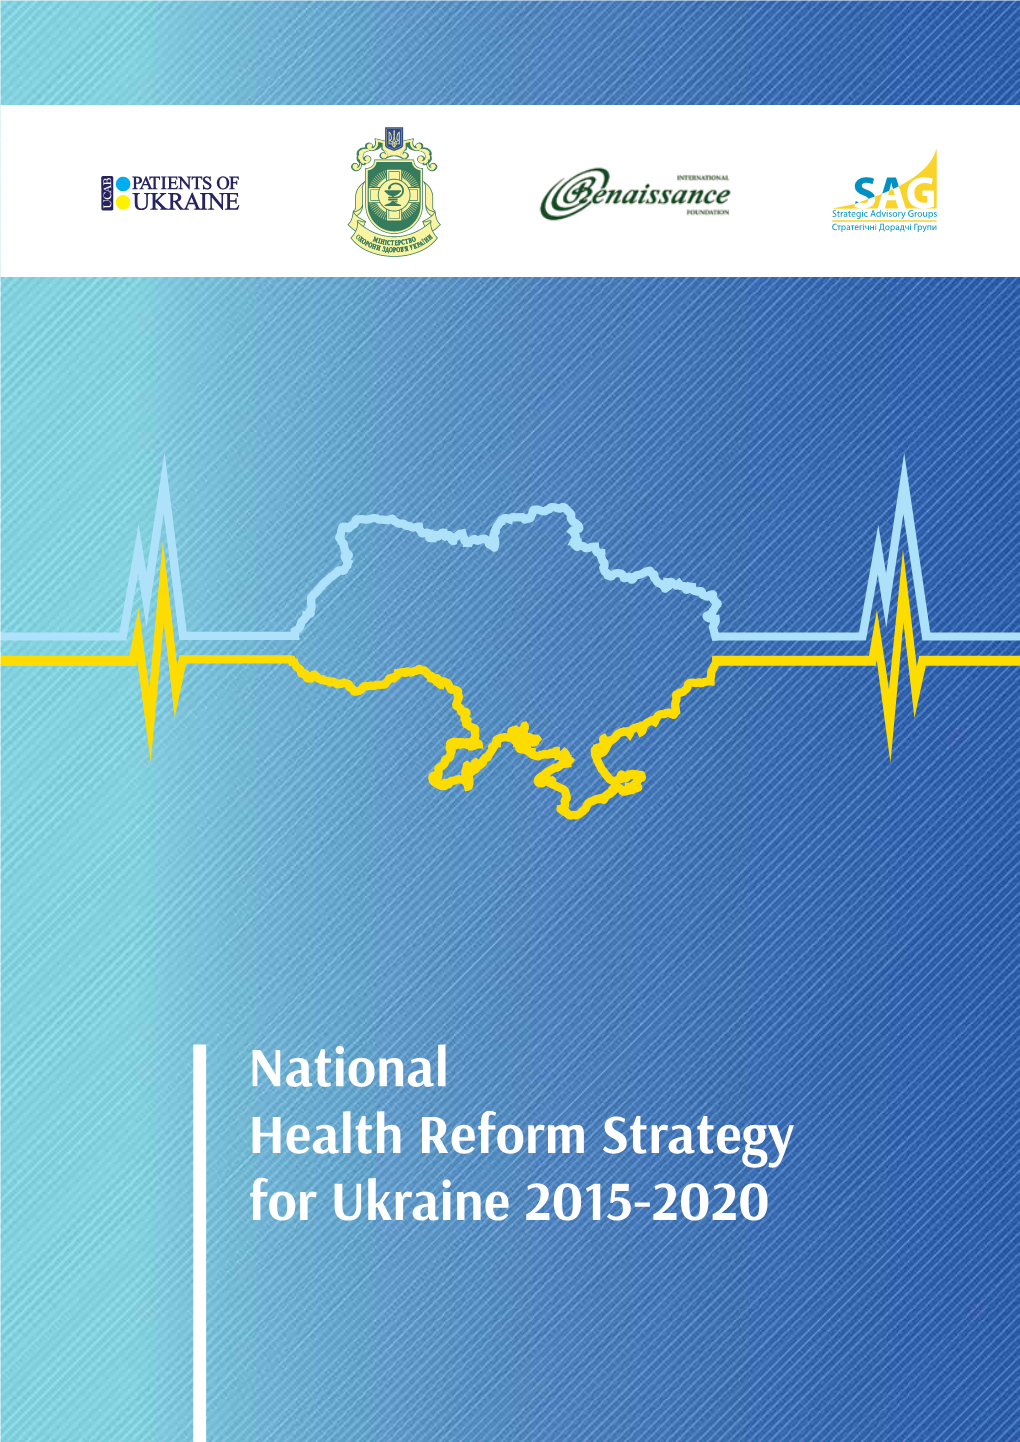 National Health Reform Strategy for Ukraine 2015-2020 Contents